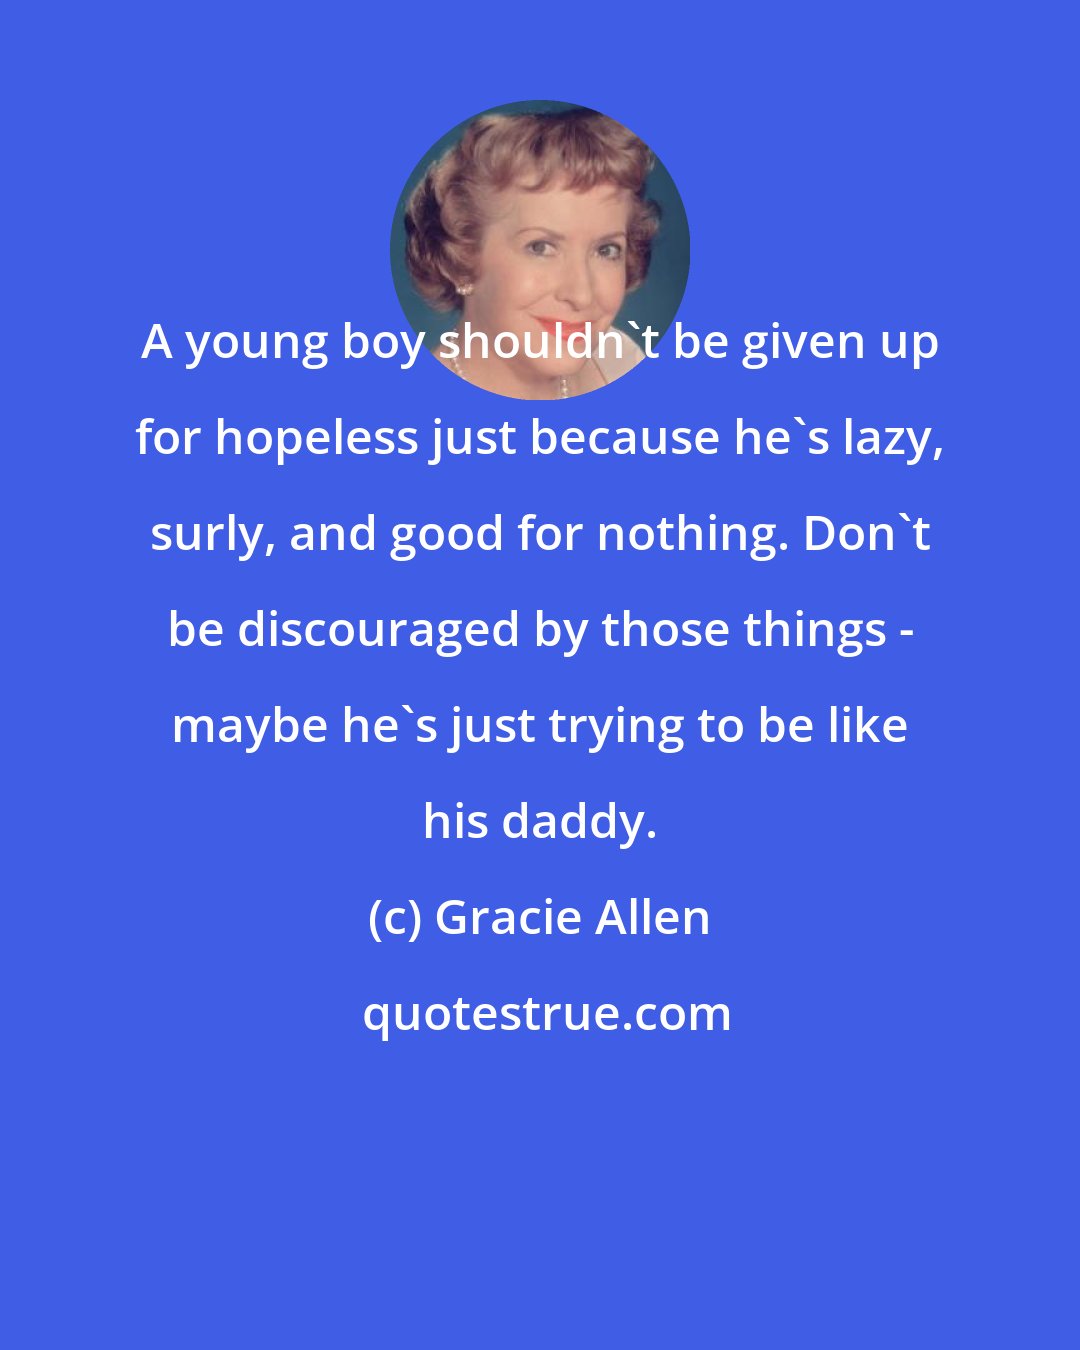 Gracie Allen: A young boy shouldn't be given up for hopeless just because he's lazy, surly, and good for nothing. Don't be discouraged by those things - maybe he's just trying to be like his daddy.